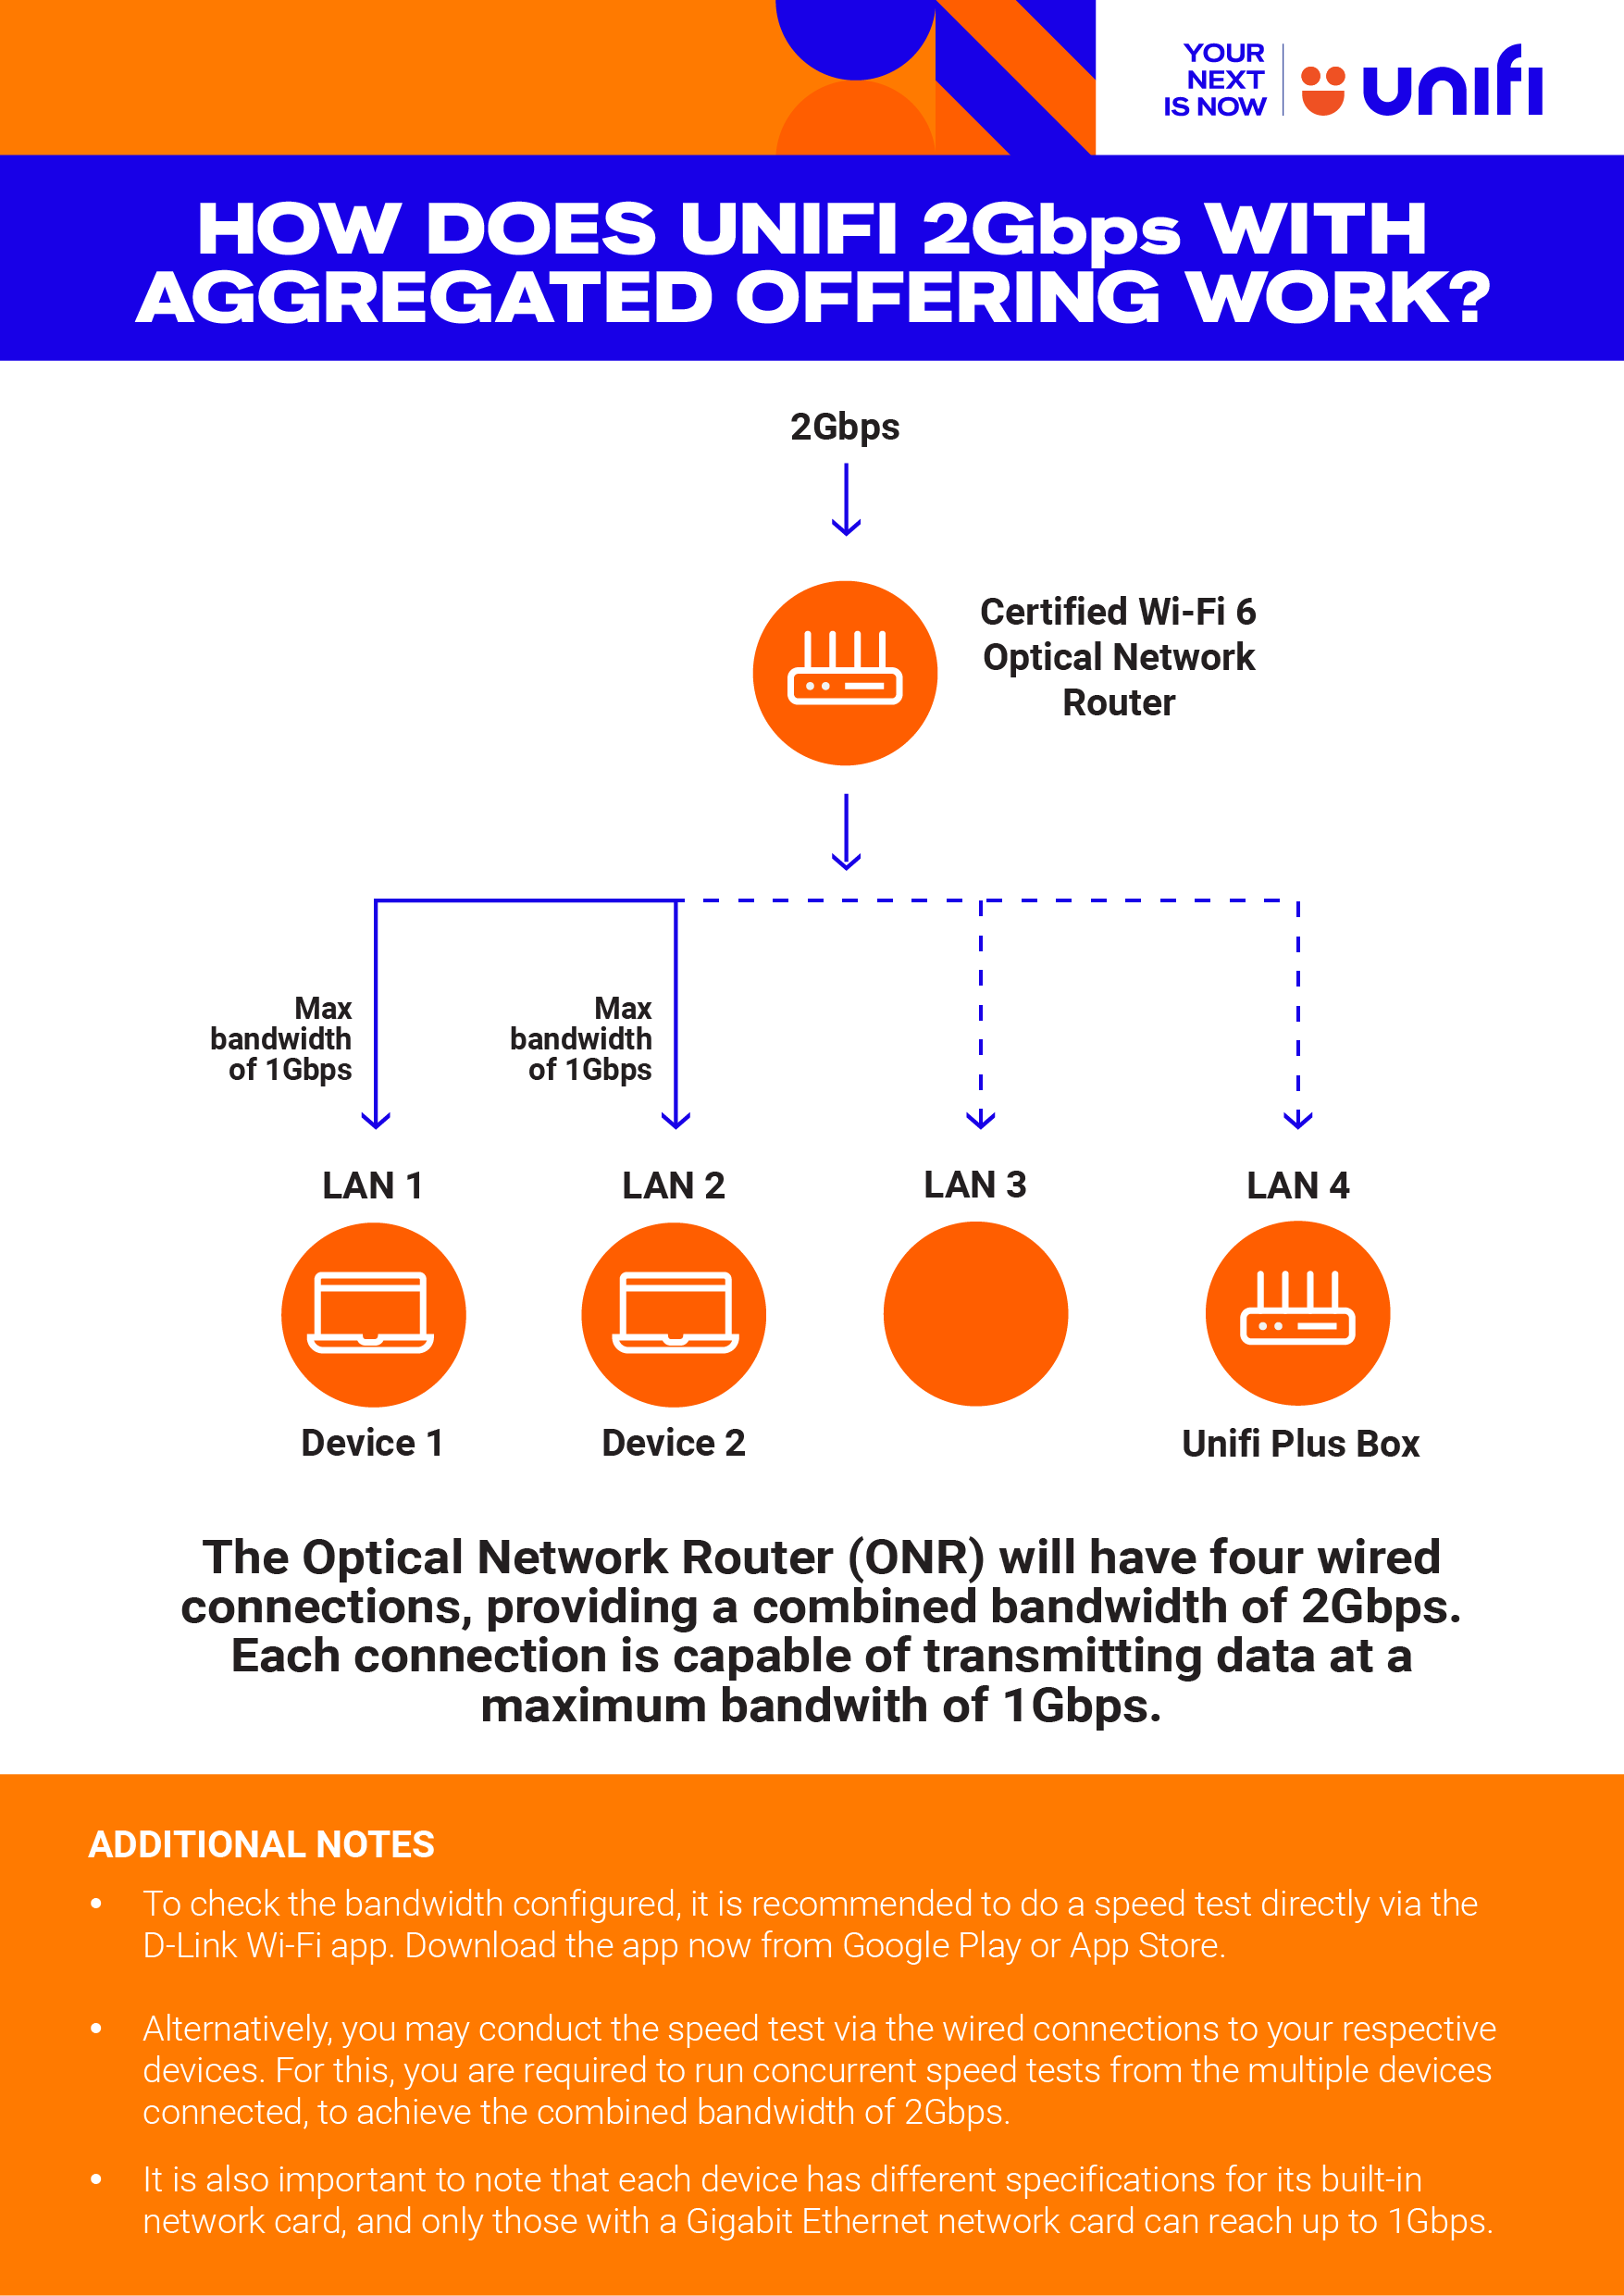 Infographic of how 2Gbps offering works